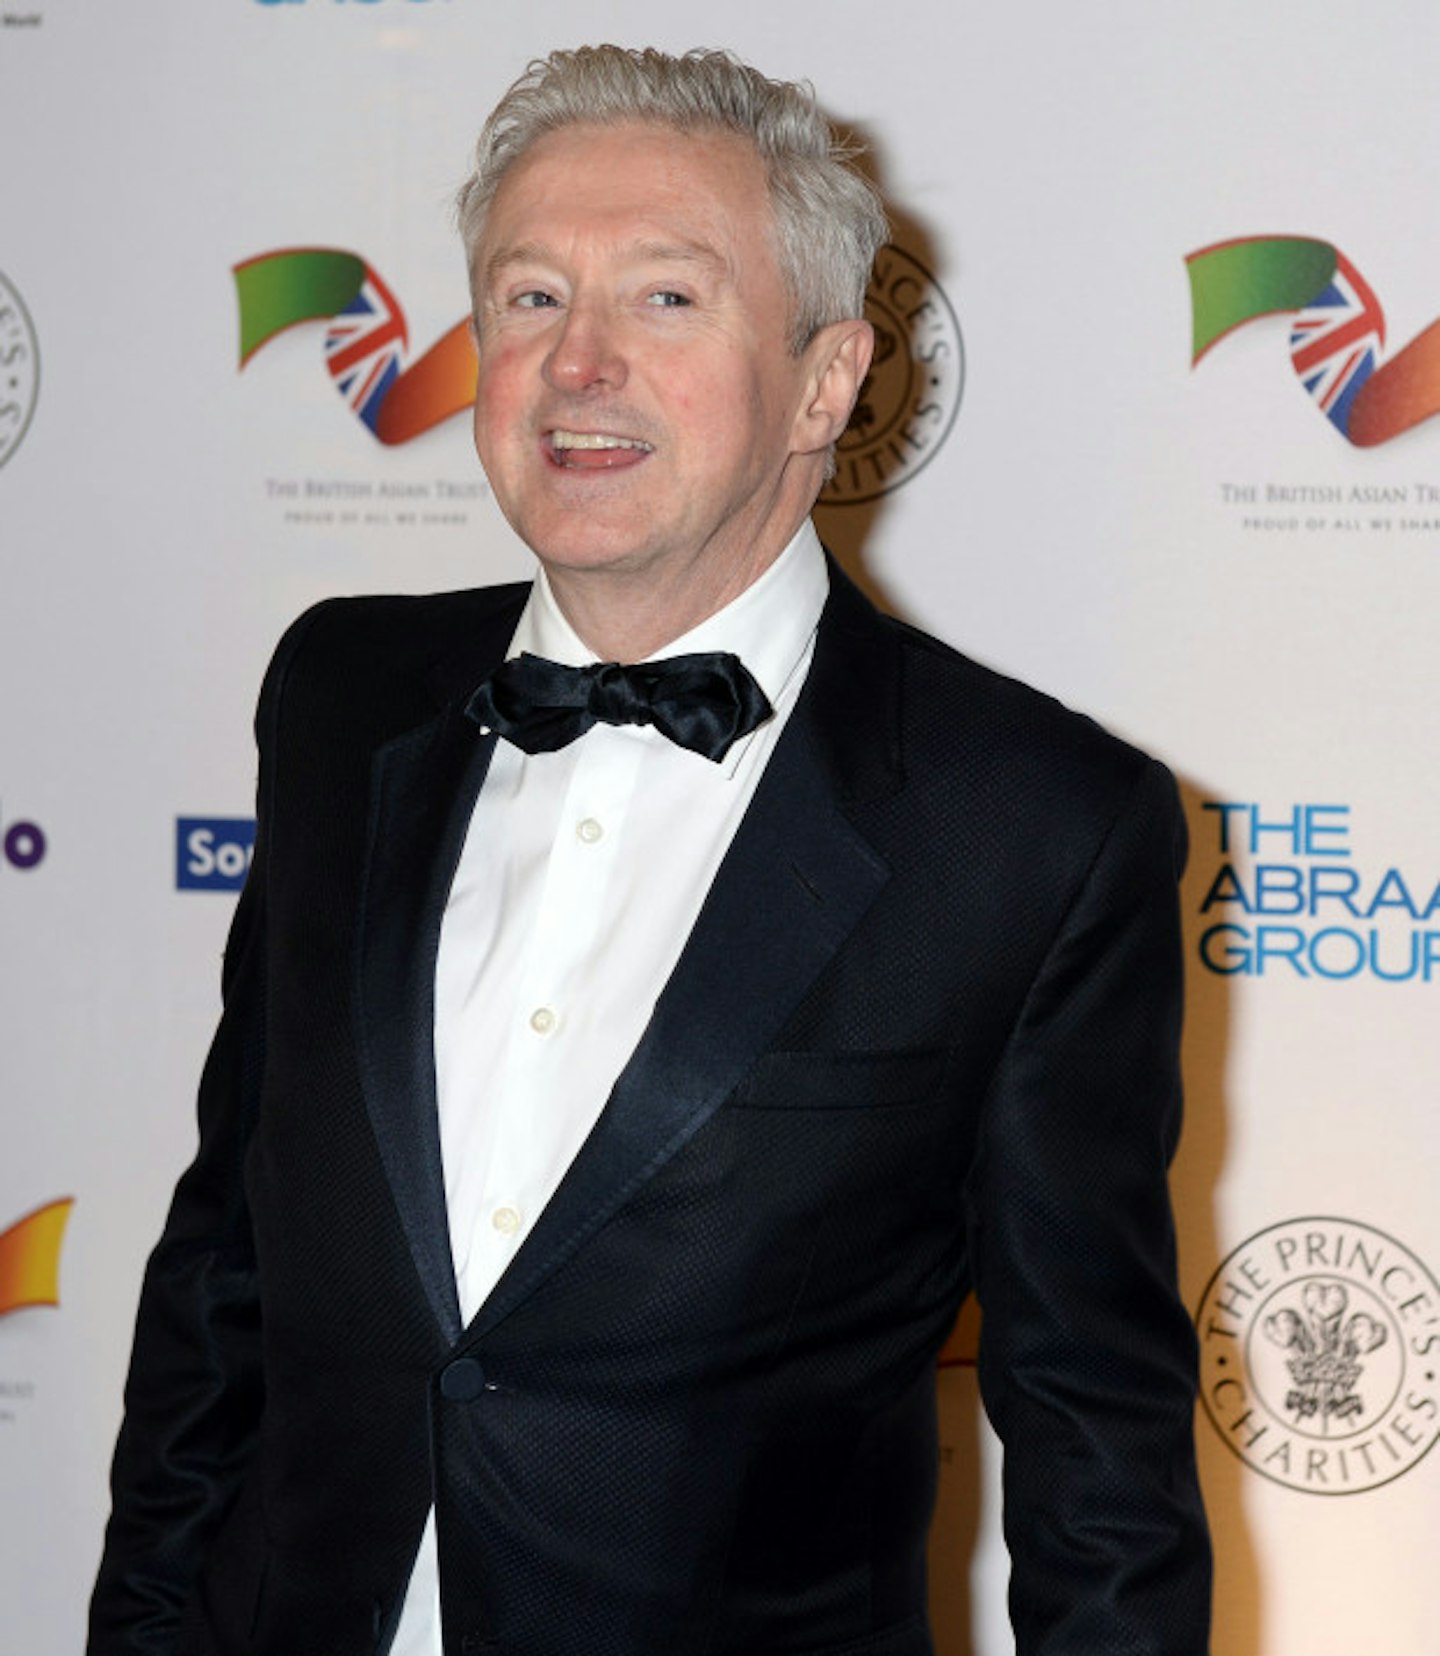 Louis Walsh: Fired nor hired.